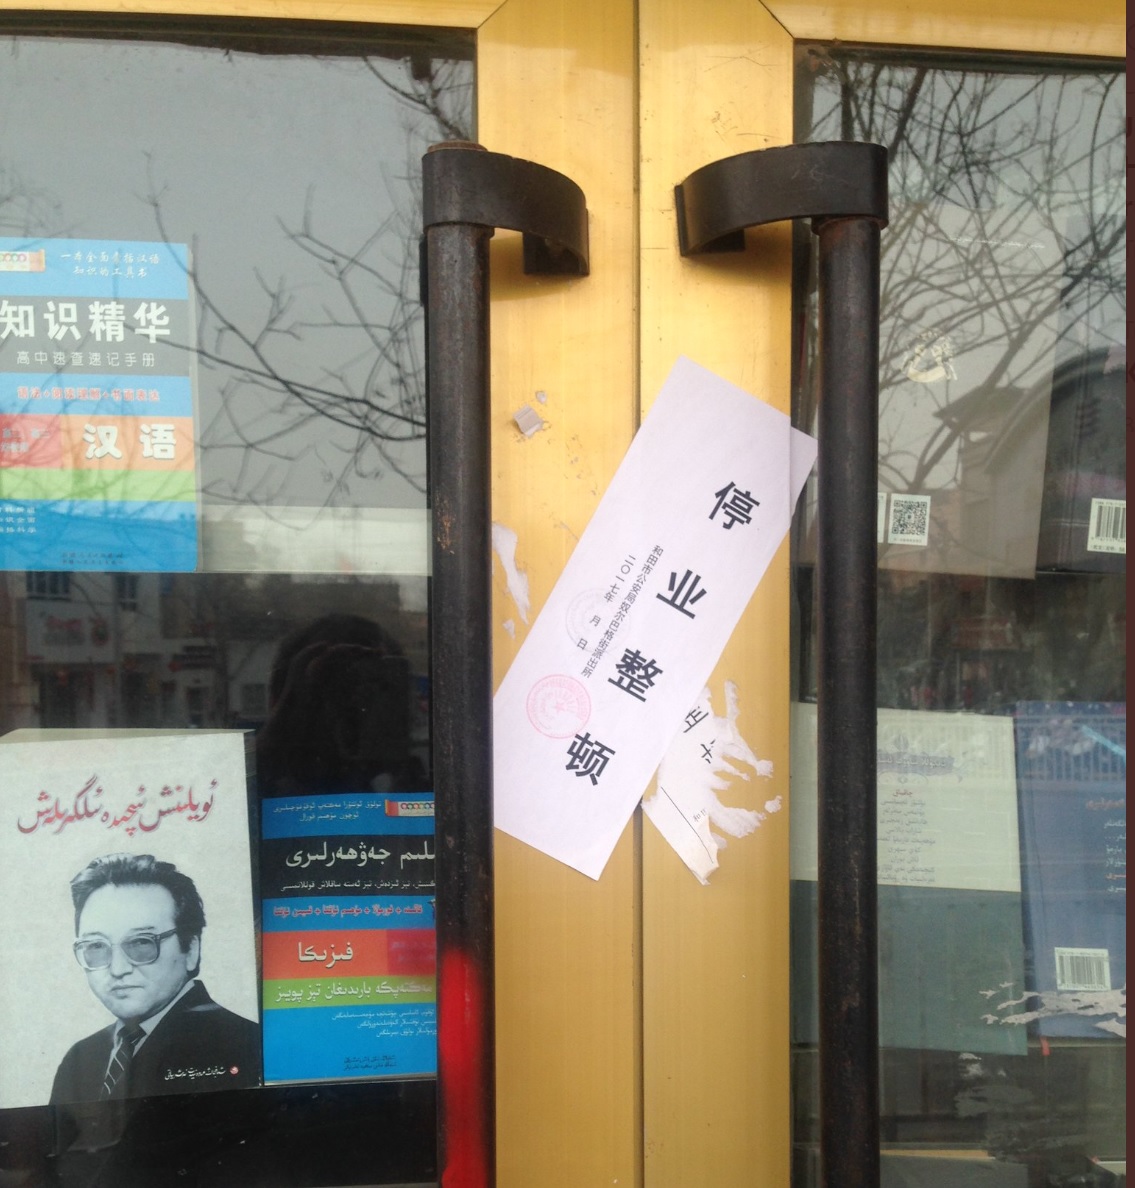 14/ Khotan (courtesy of  @asianmktsphilly) "Suspended Business" (by order of Khotan police). Individual did not find one Uyghur bookstore open in 2018 Hotan)